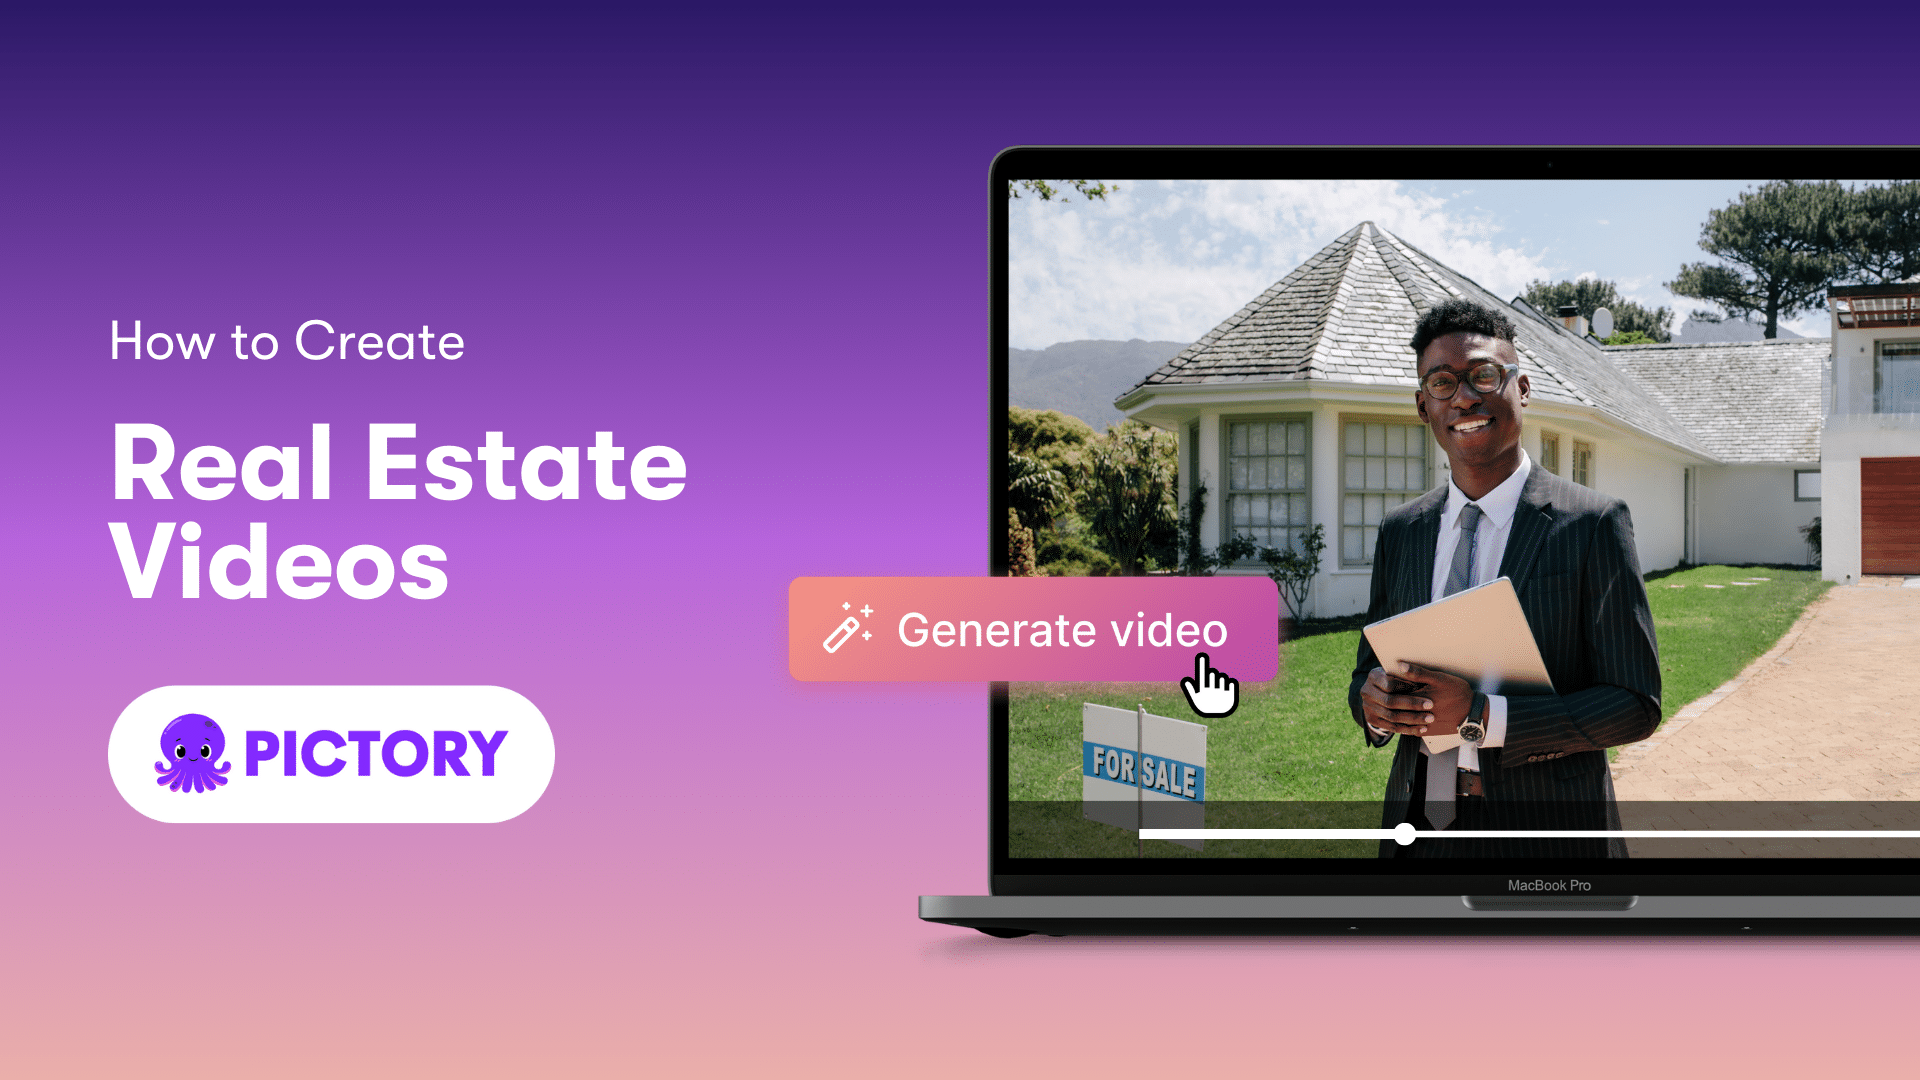 How to create real estate videos blog thumbnail